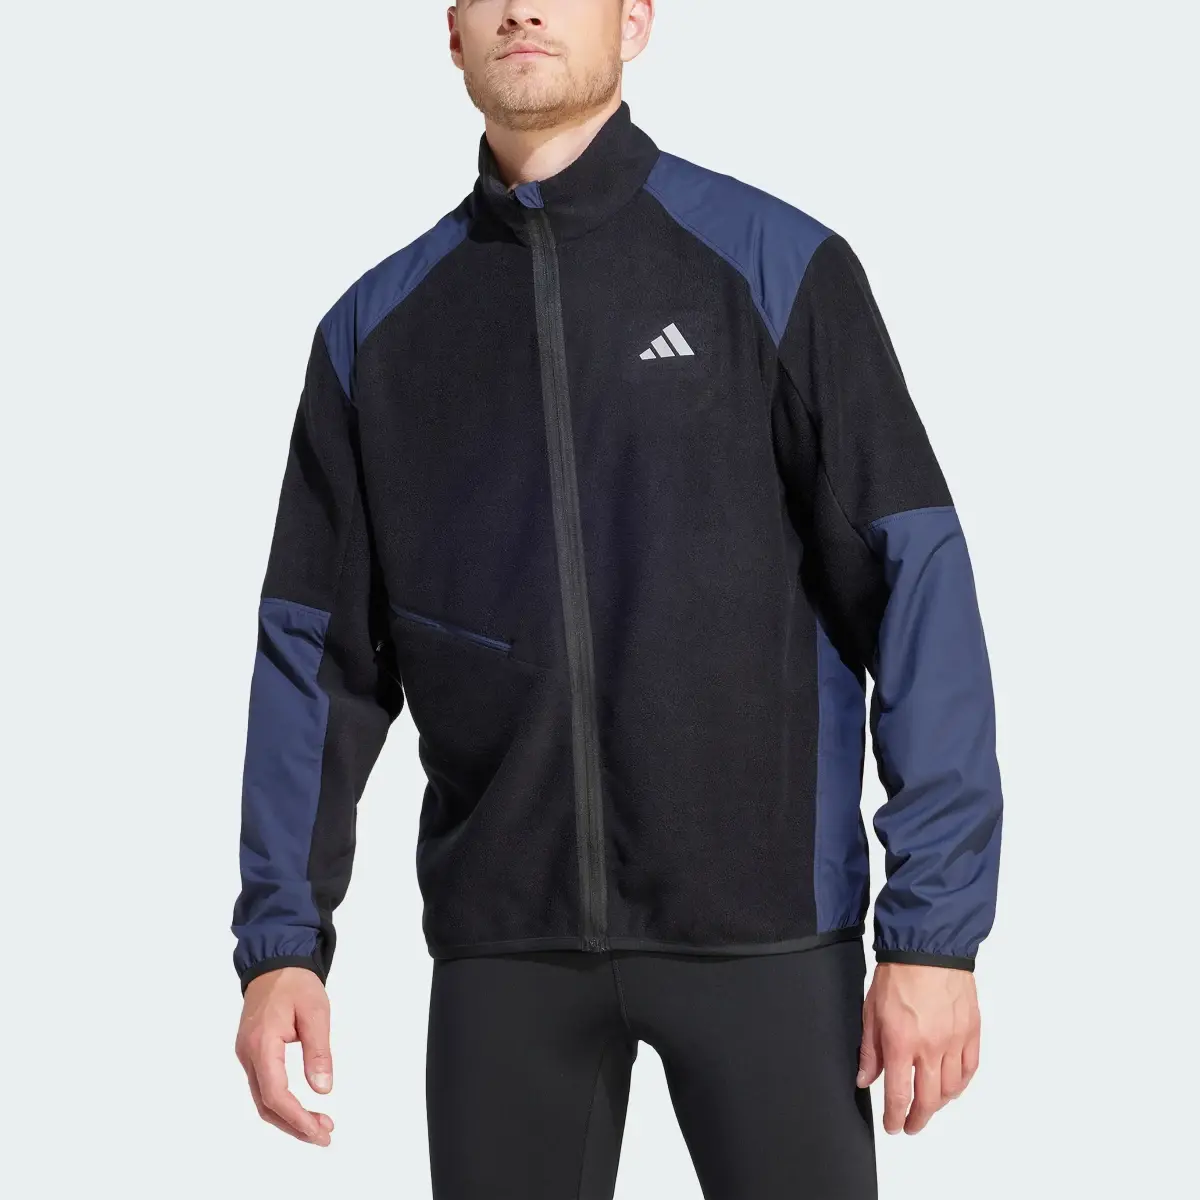 Adidas Ultimate Running Conquer the Elements Jacket. 1